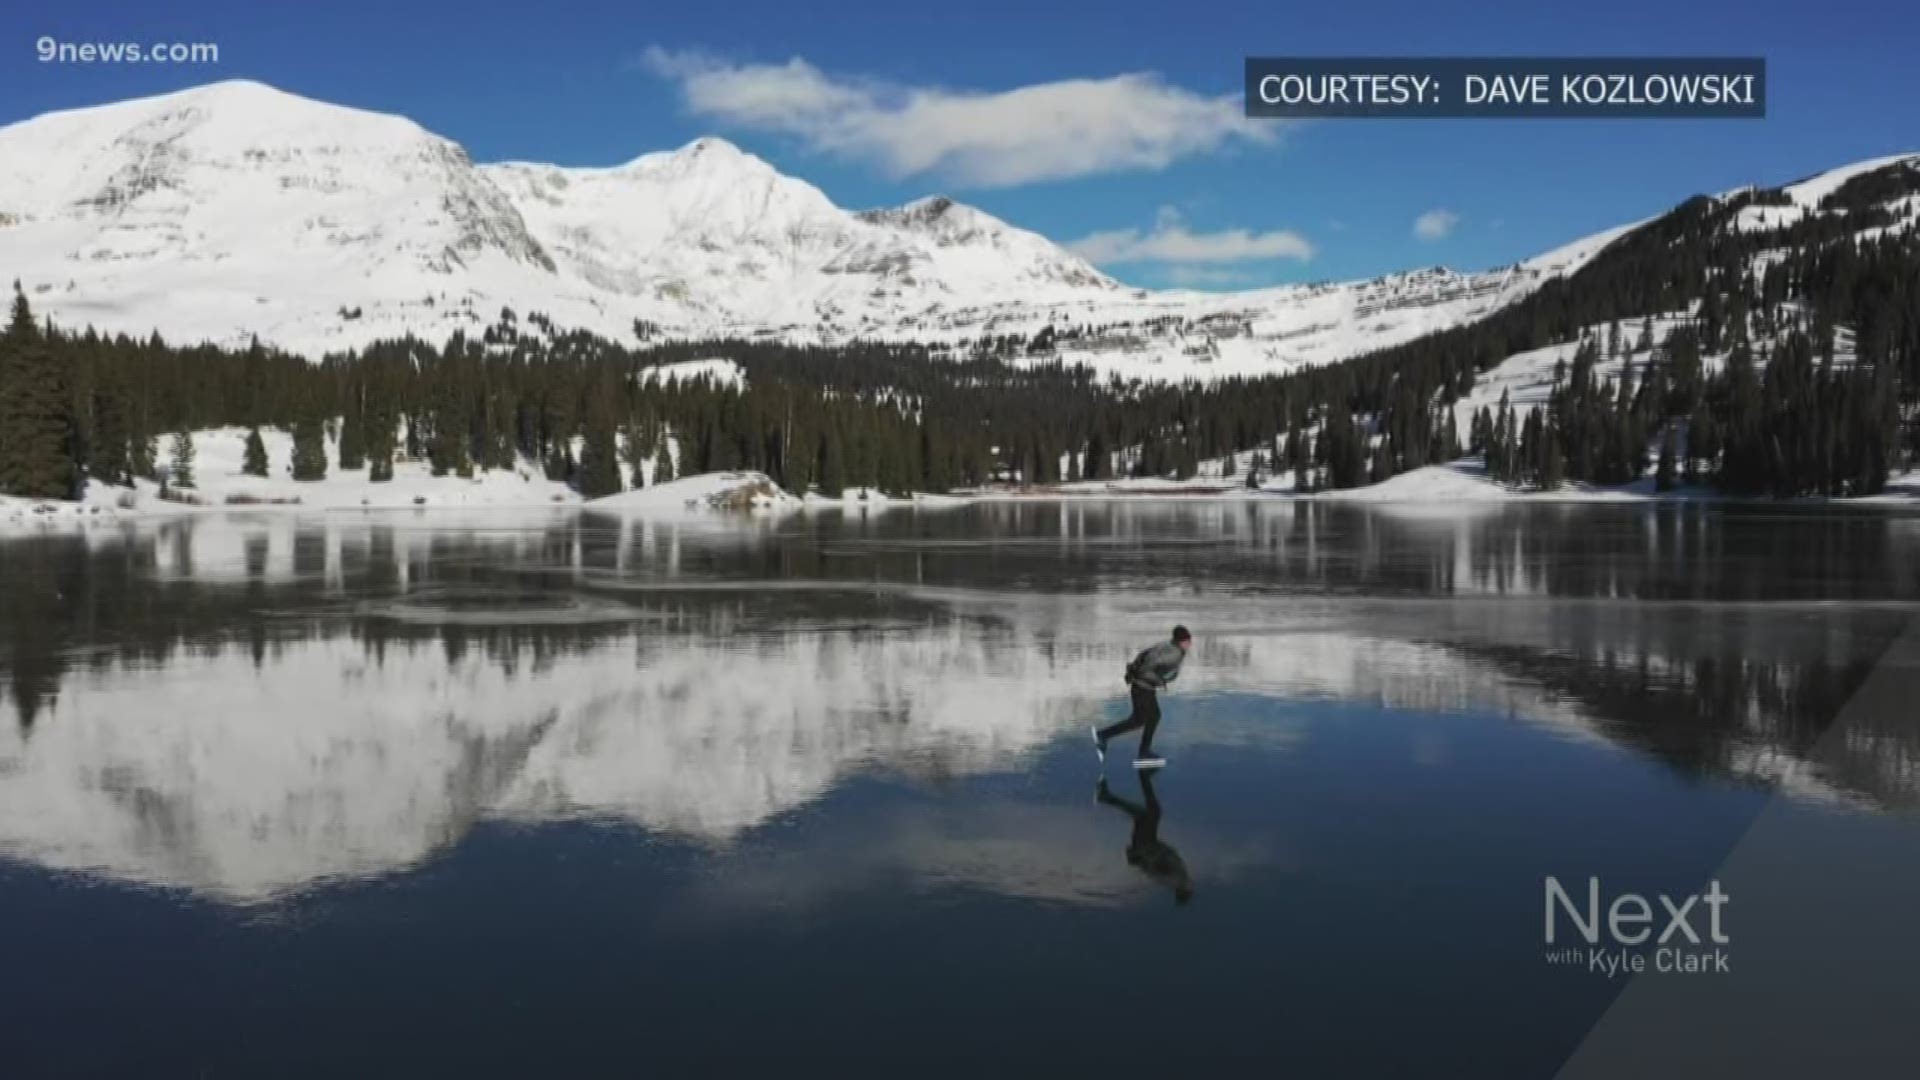 Dave Kozlowski is a seasonal lake skater. He tosses a grapefruit-size rock onto the ice to make sure the freeze is just right and then takes off.